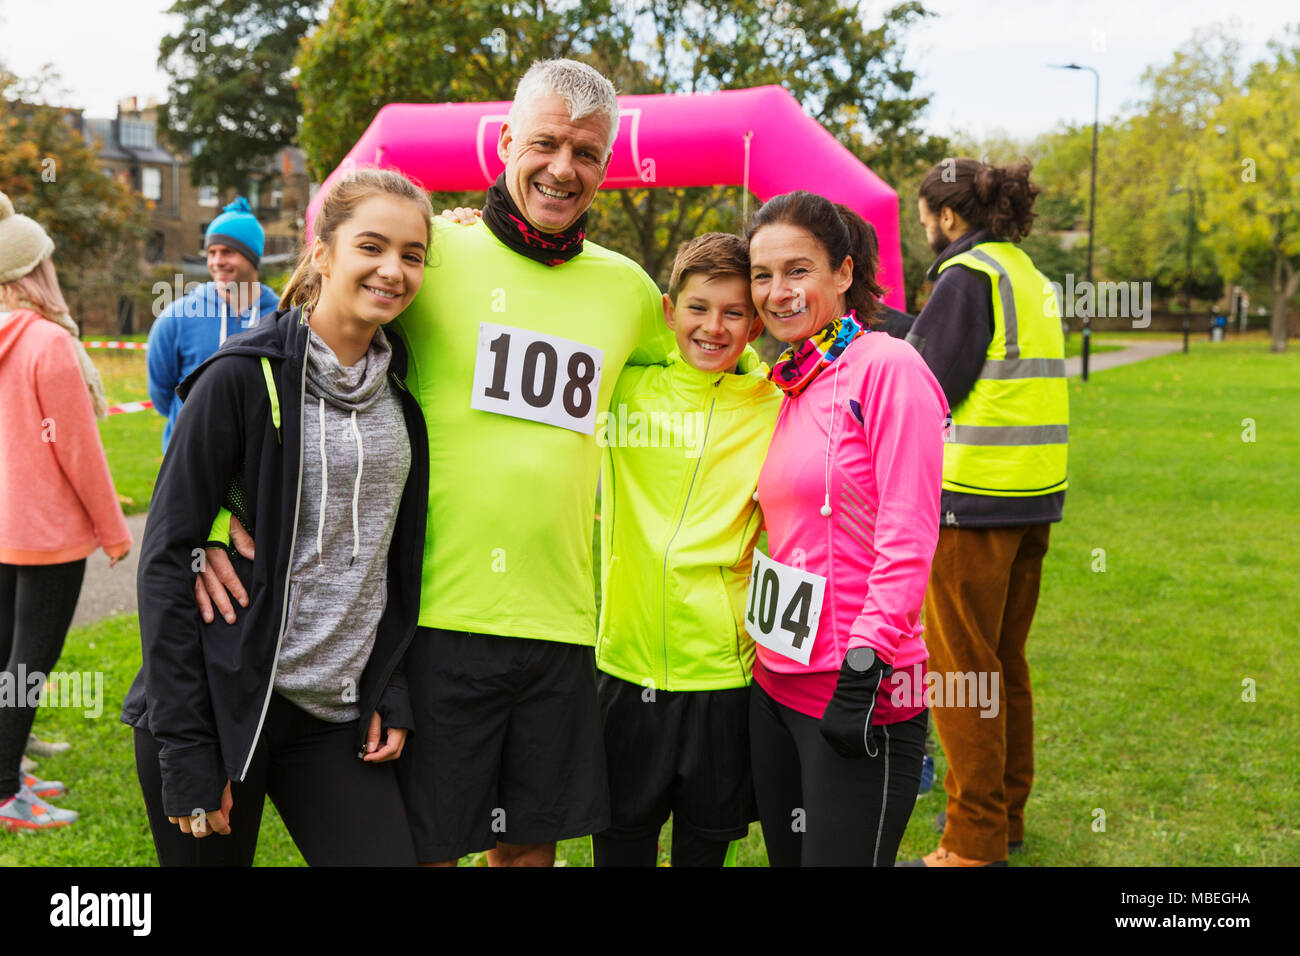 Portrait smiling family runners at charity run in park Stock Photo